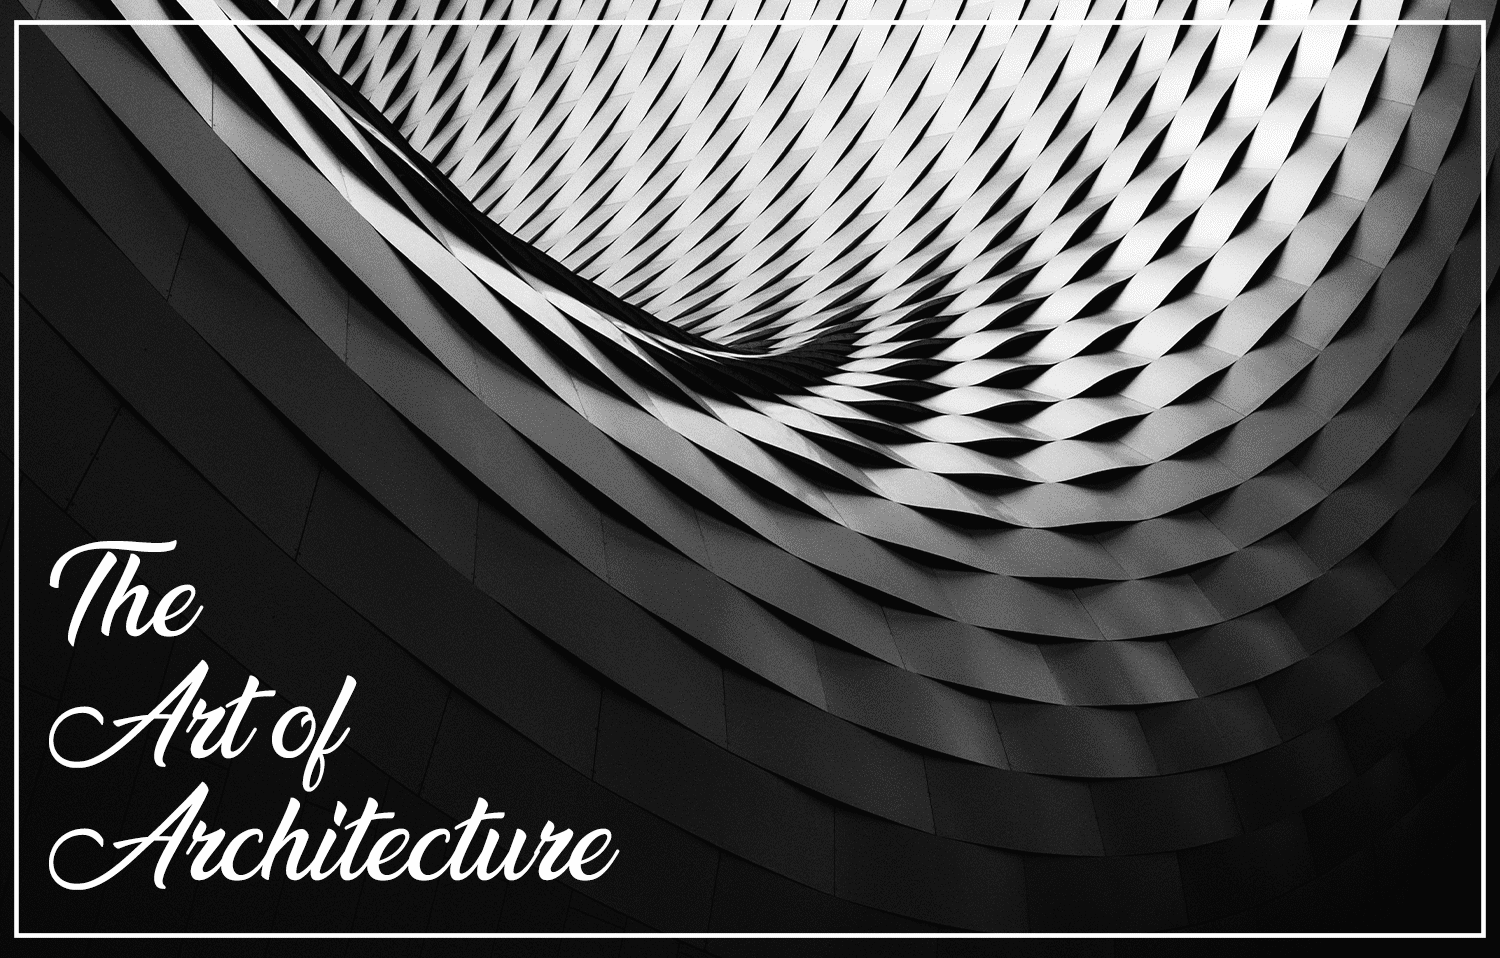 The art of architecture